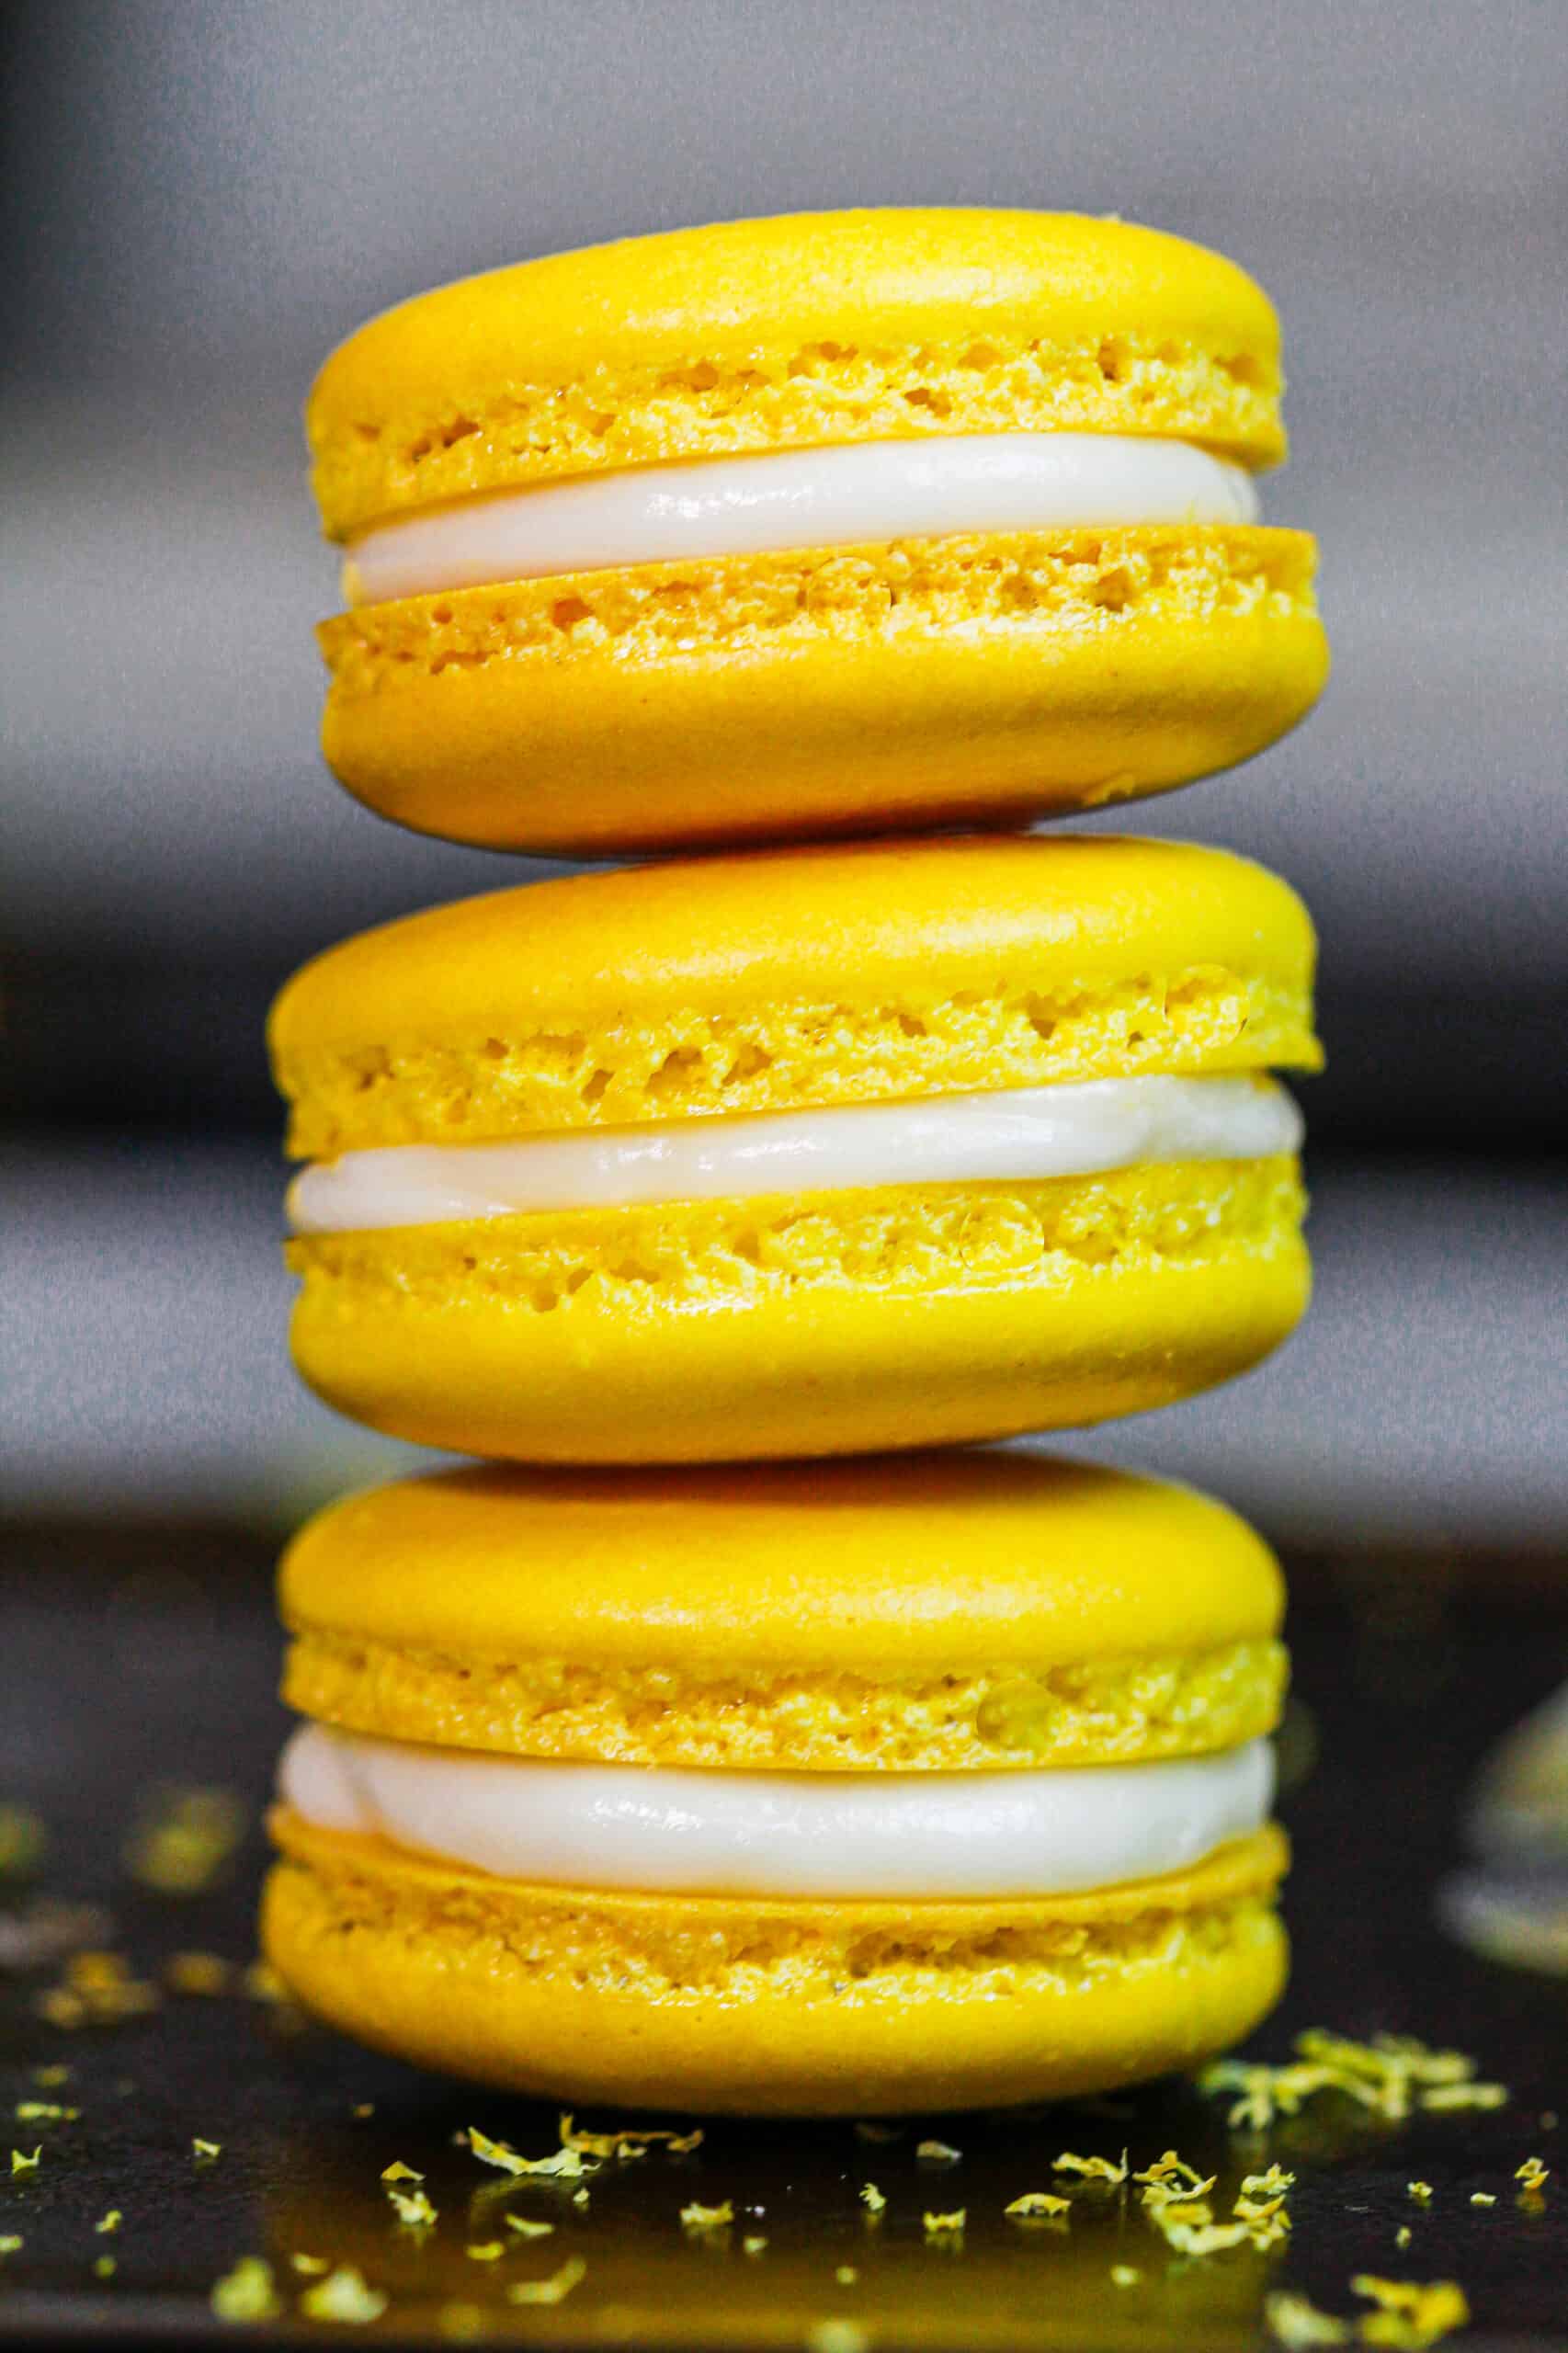 Beginner's Guide to French Macarons - Sally's Baking Addiction